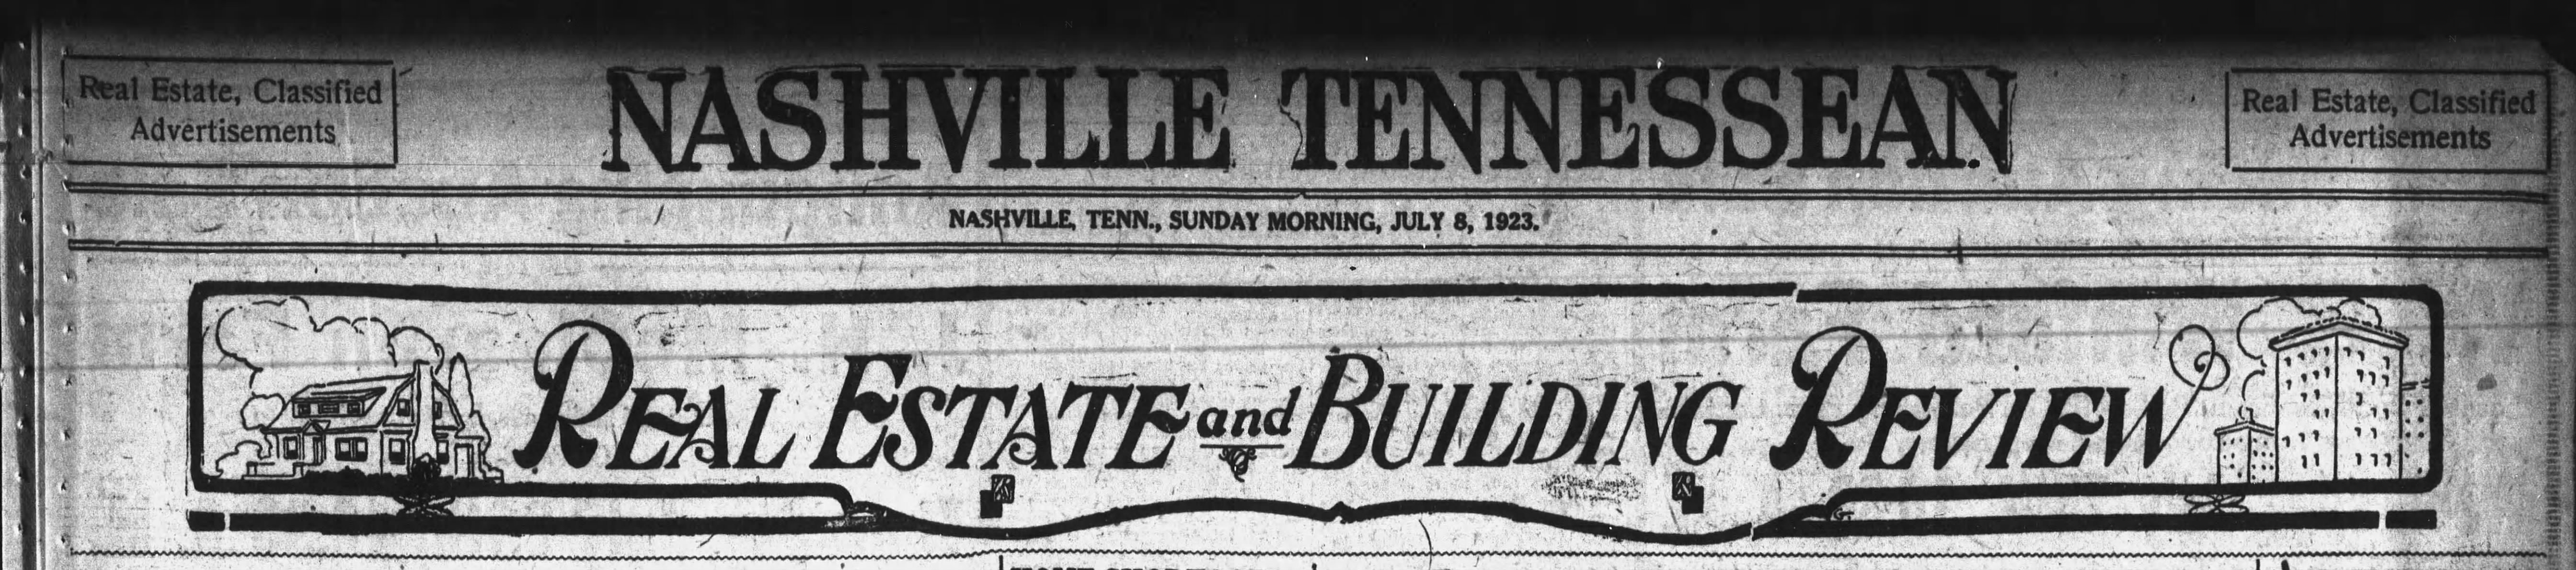 Tennessean headline for the Real Estate and Building Review